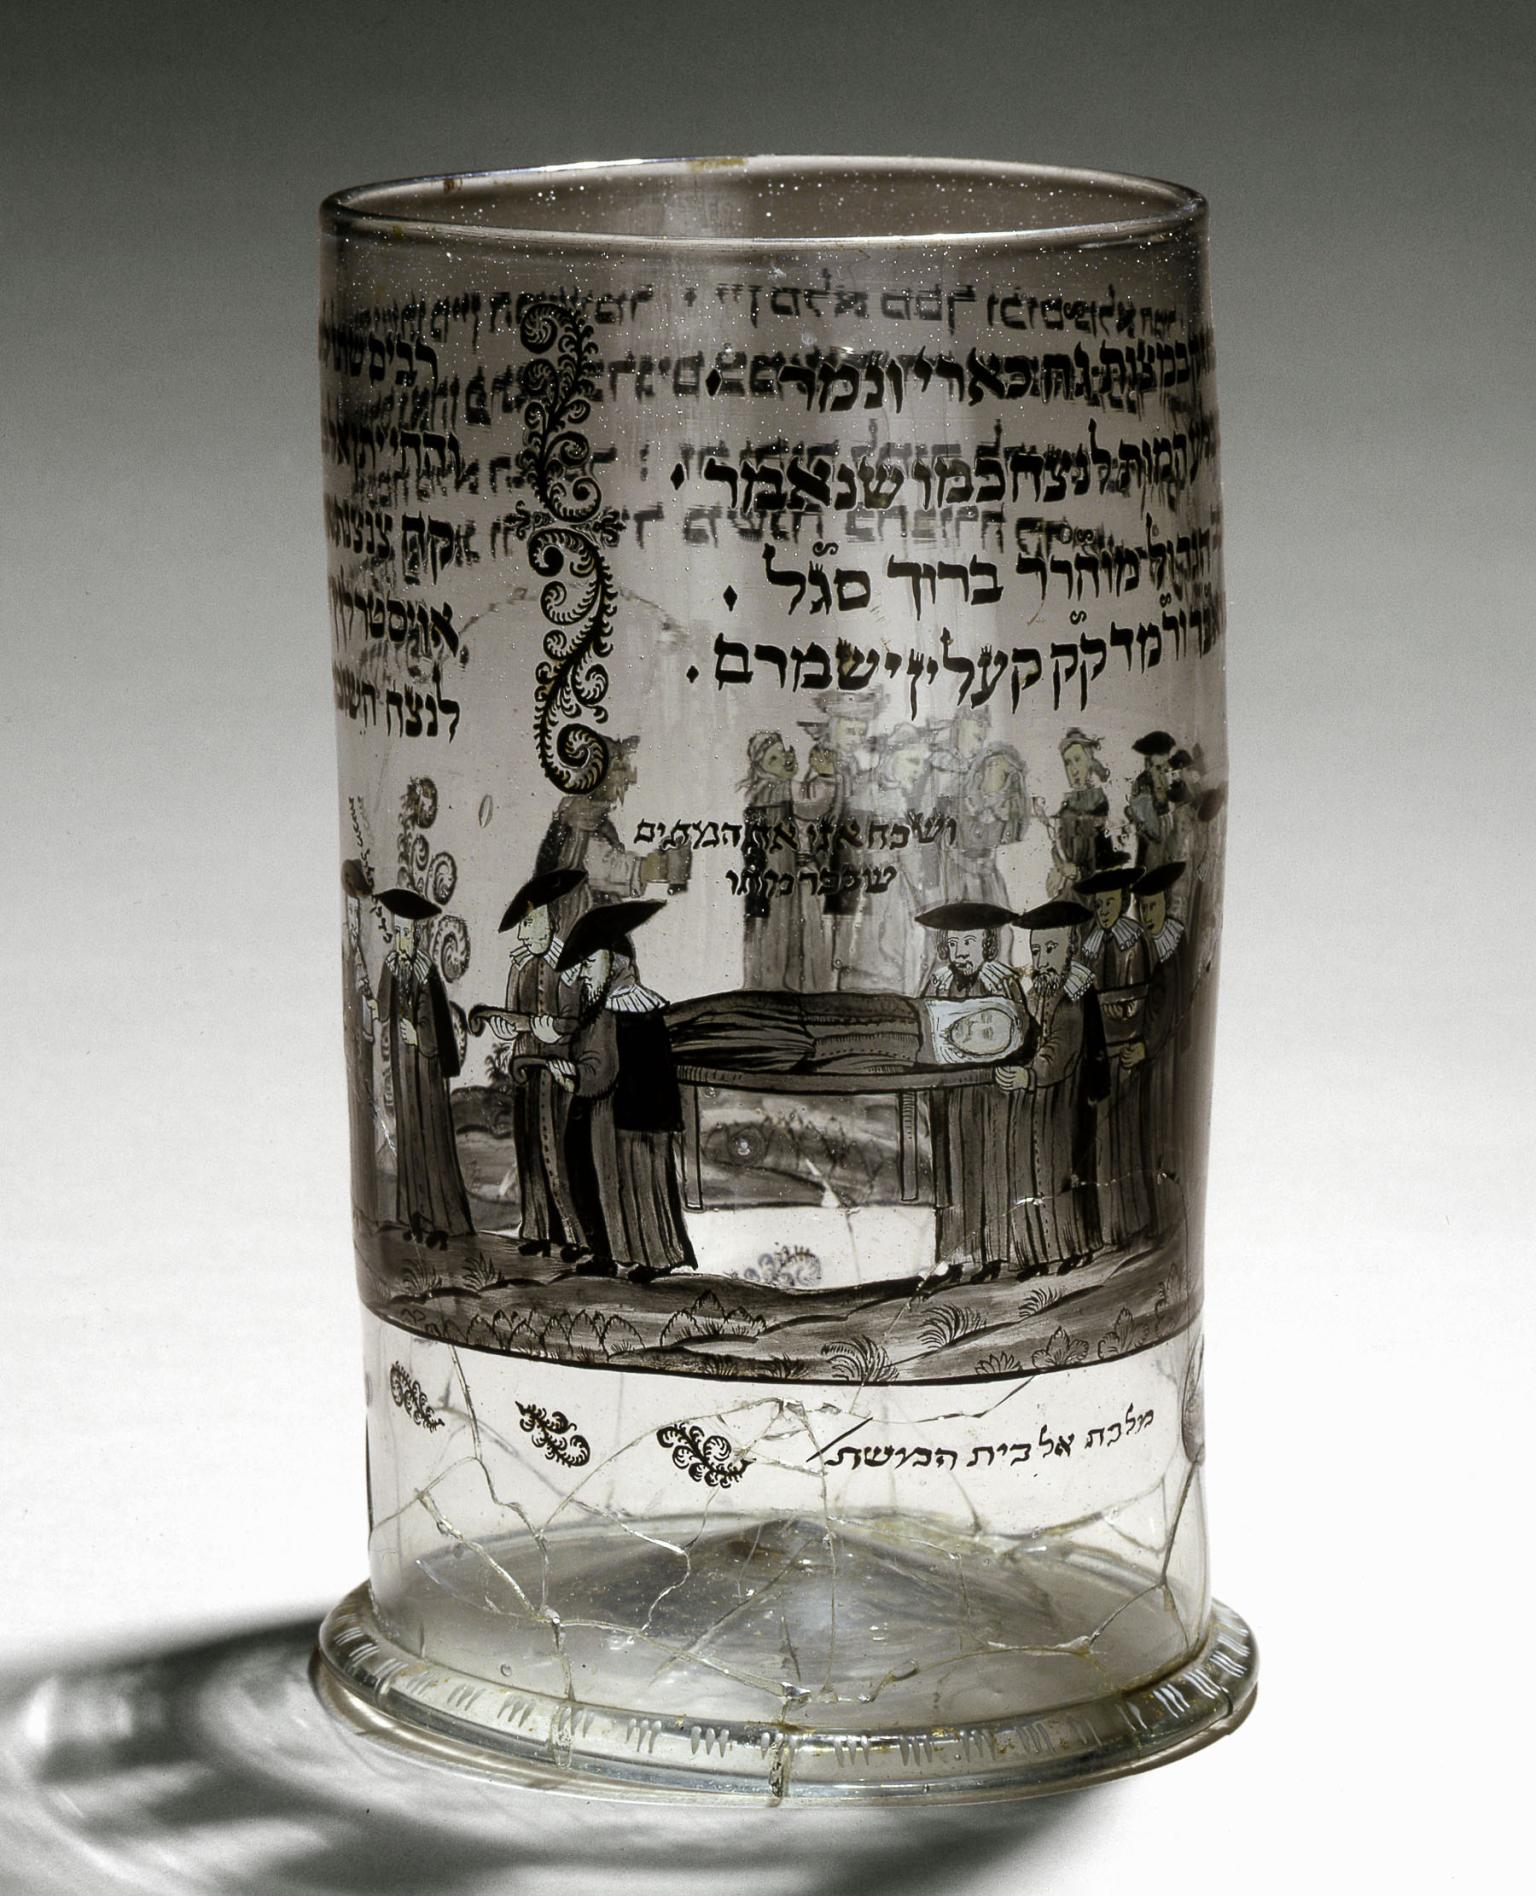 Glass cup etched with Hebrew text and image of people carrying deceased person on stretcher.